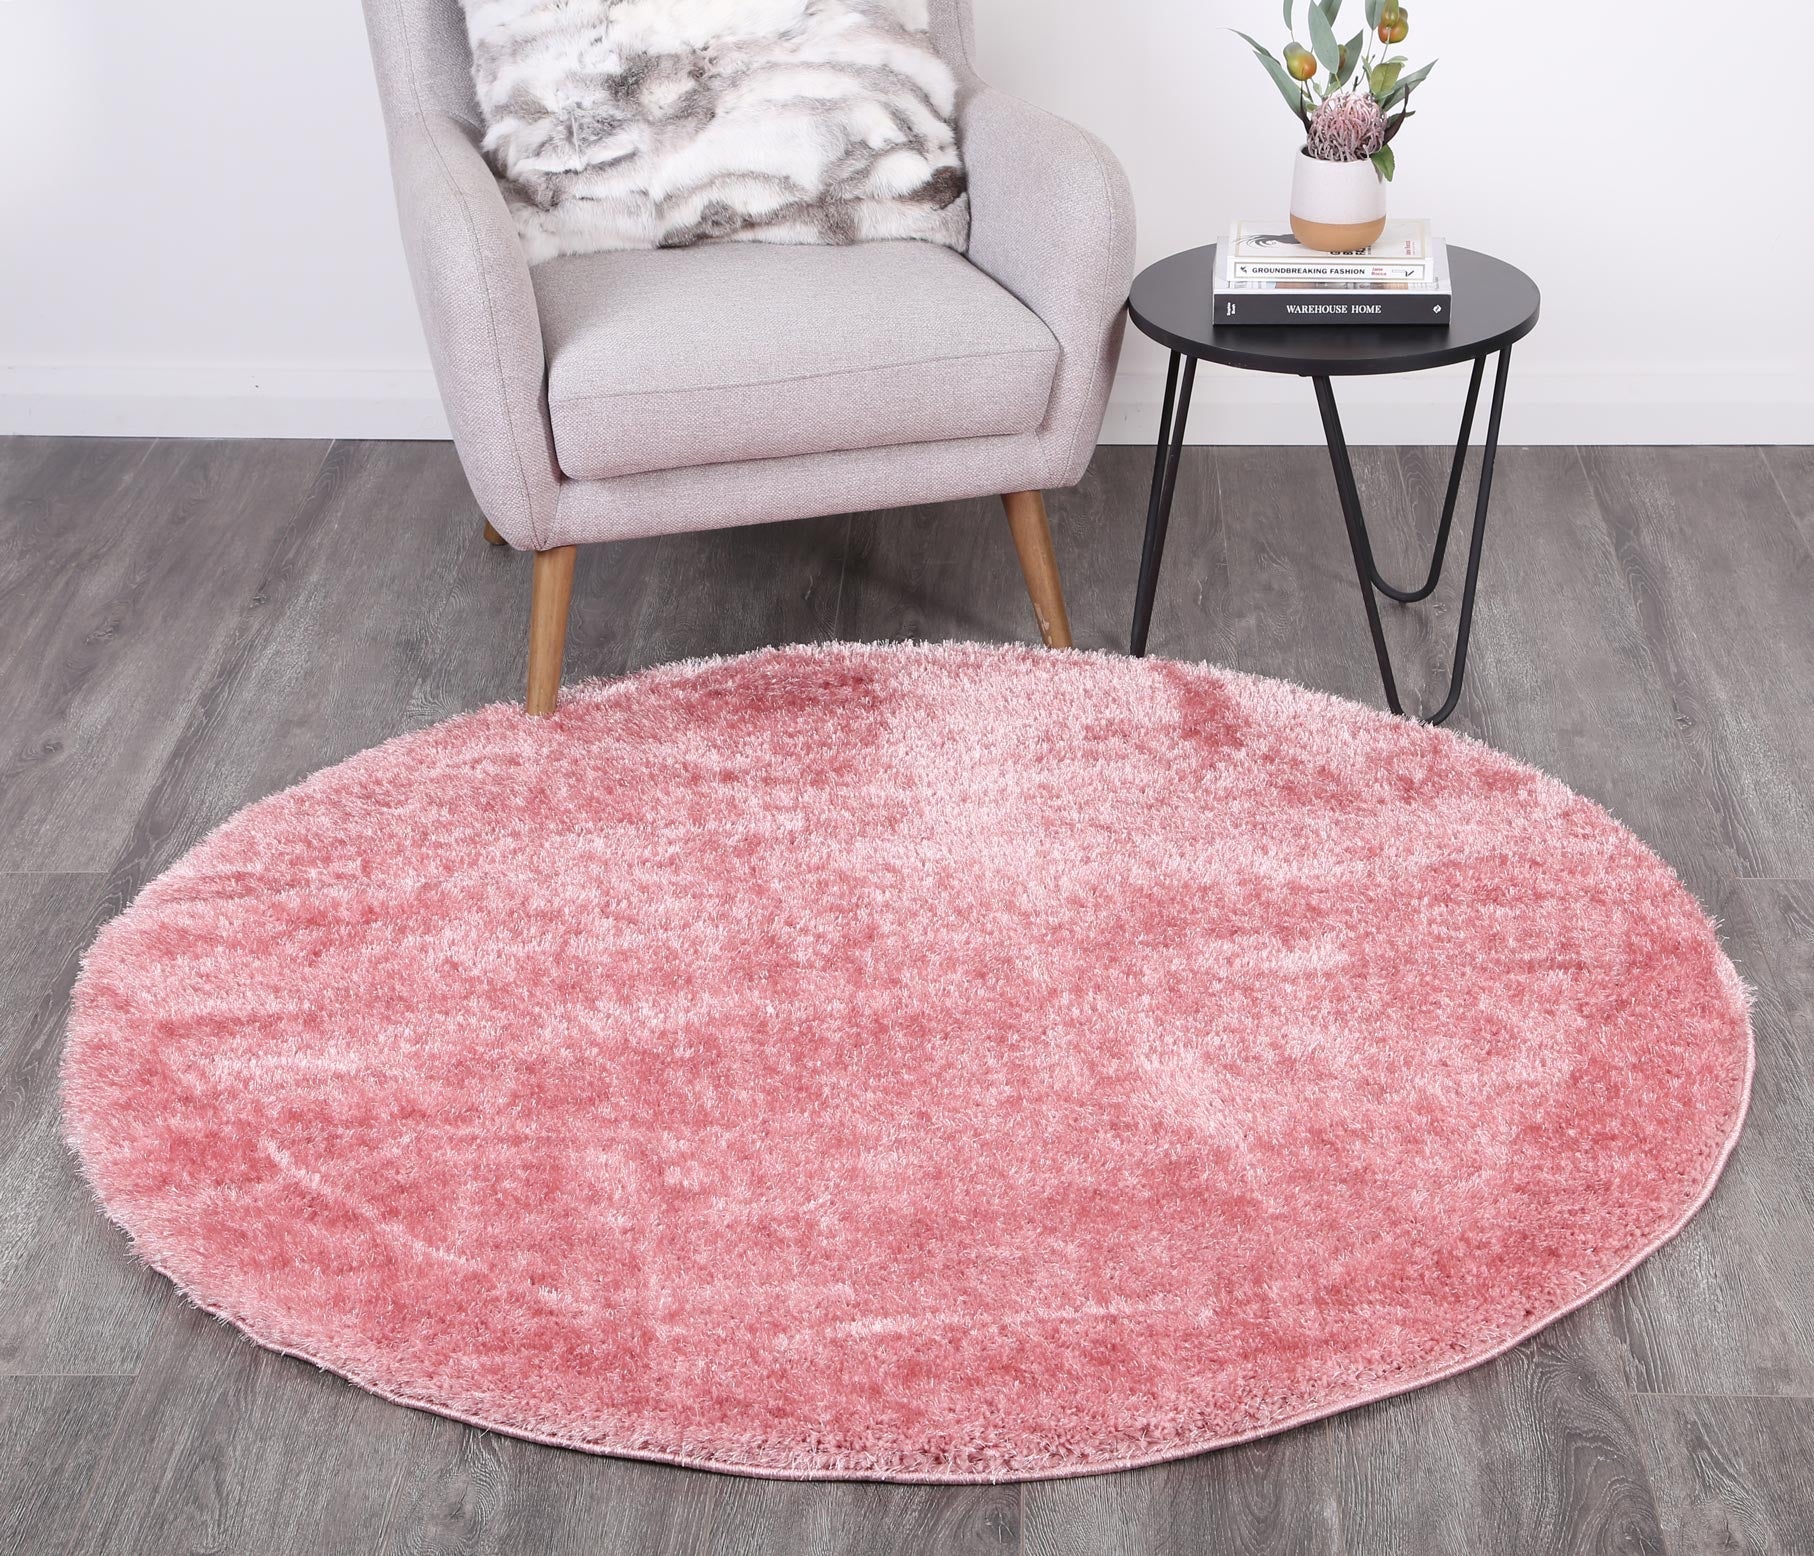 Round rug - rugs a million